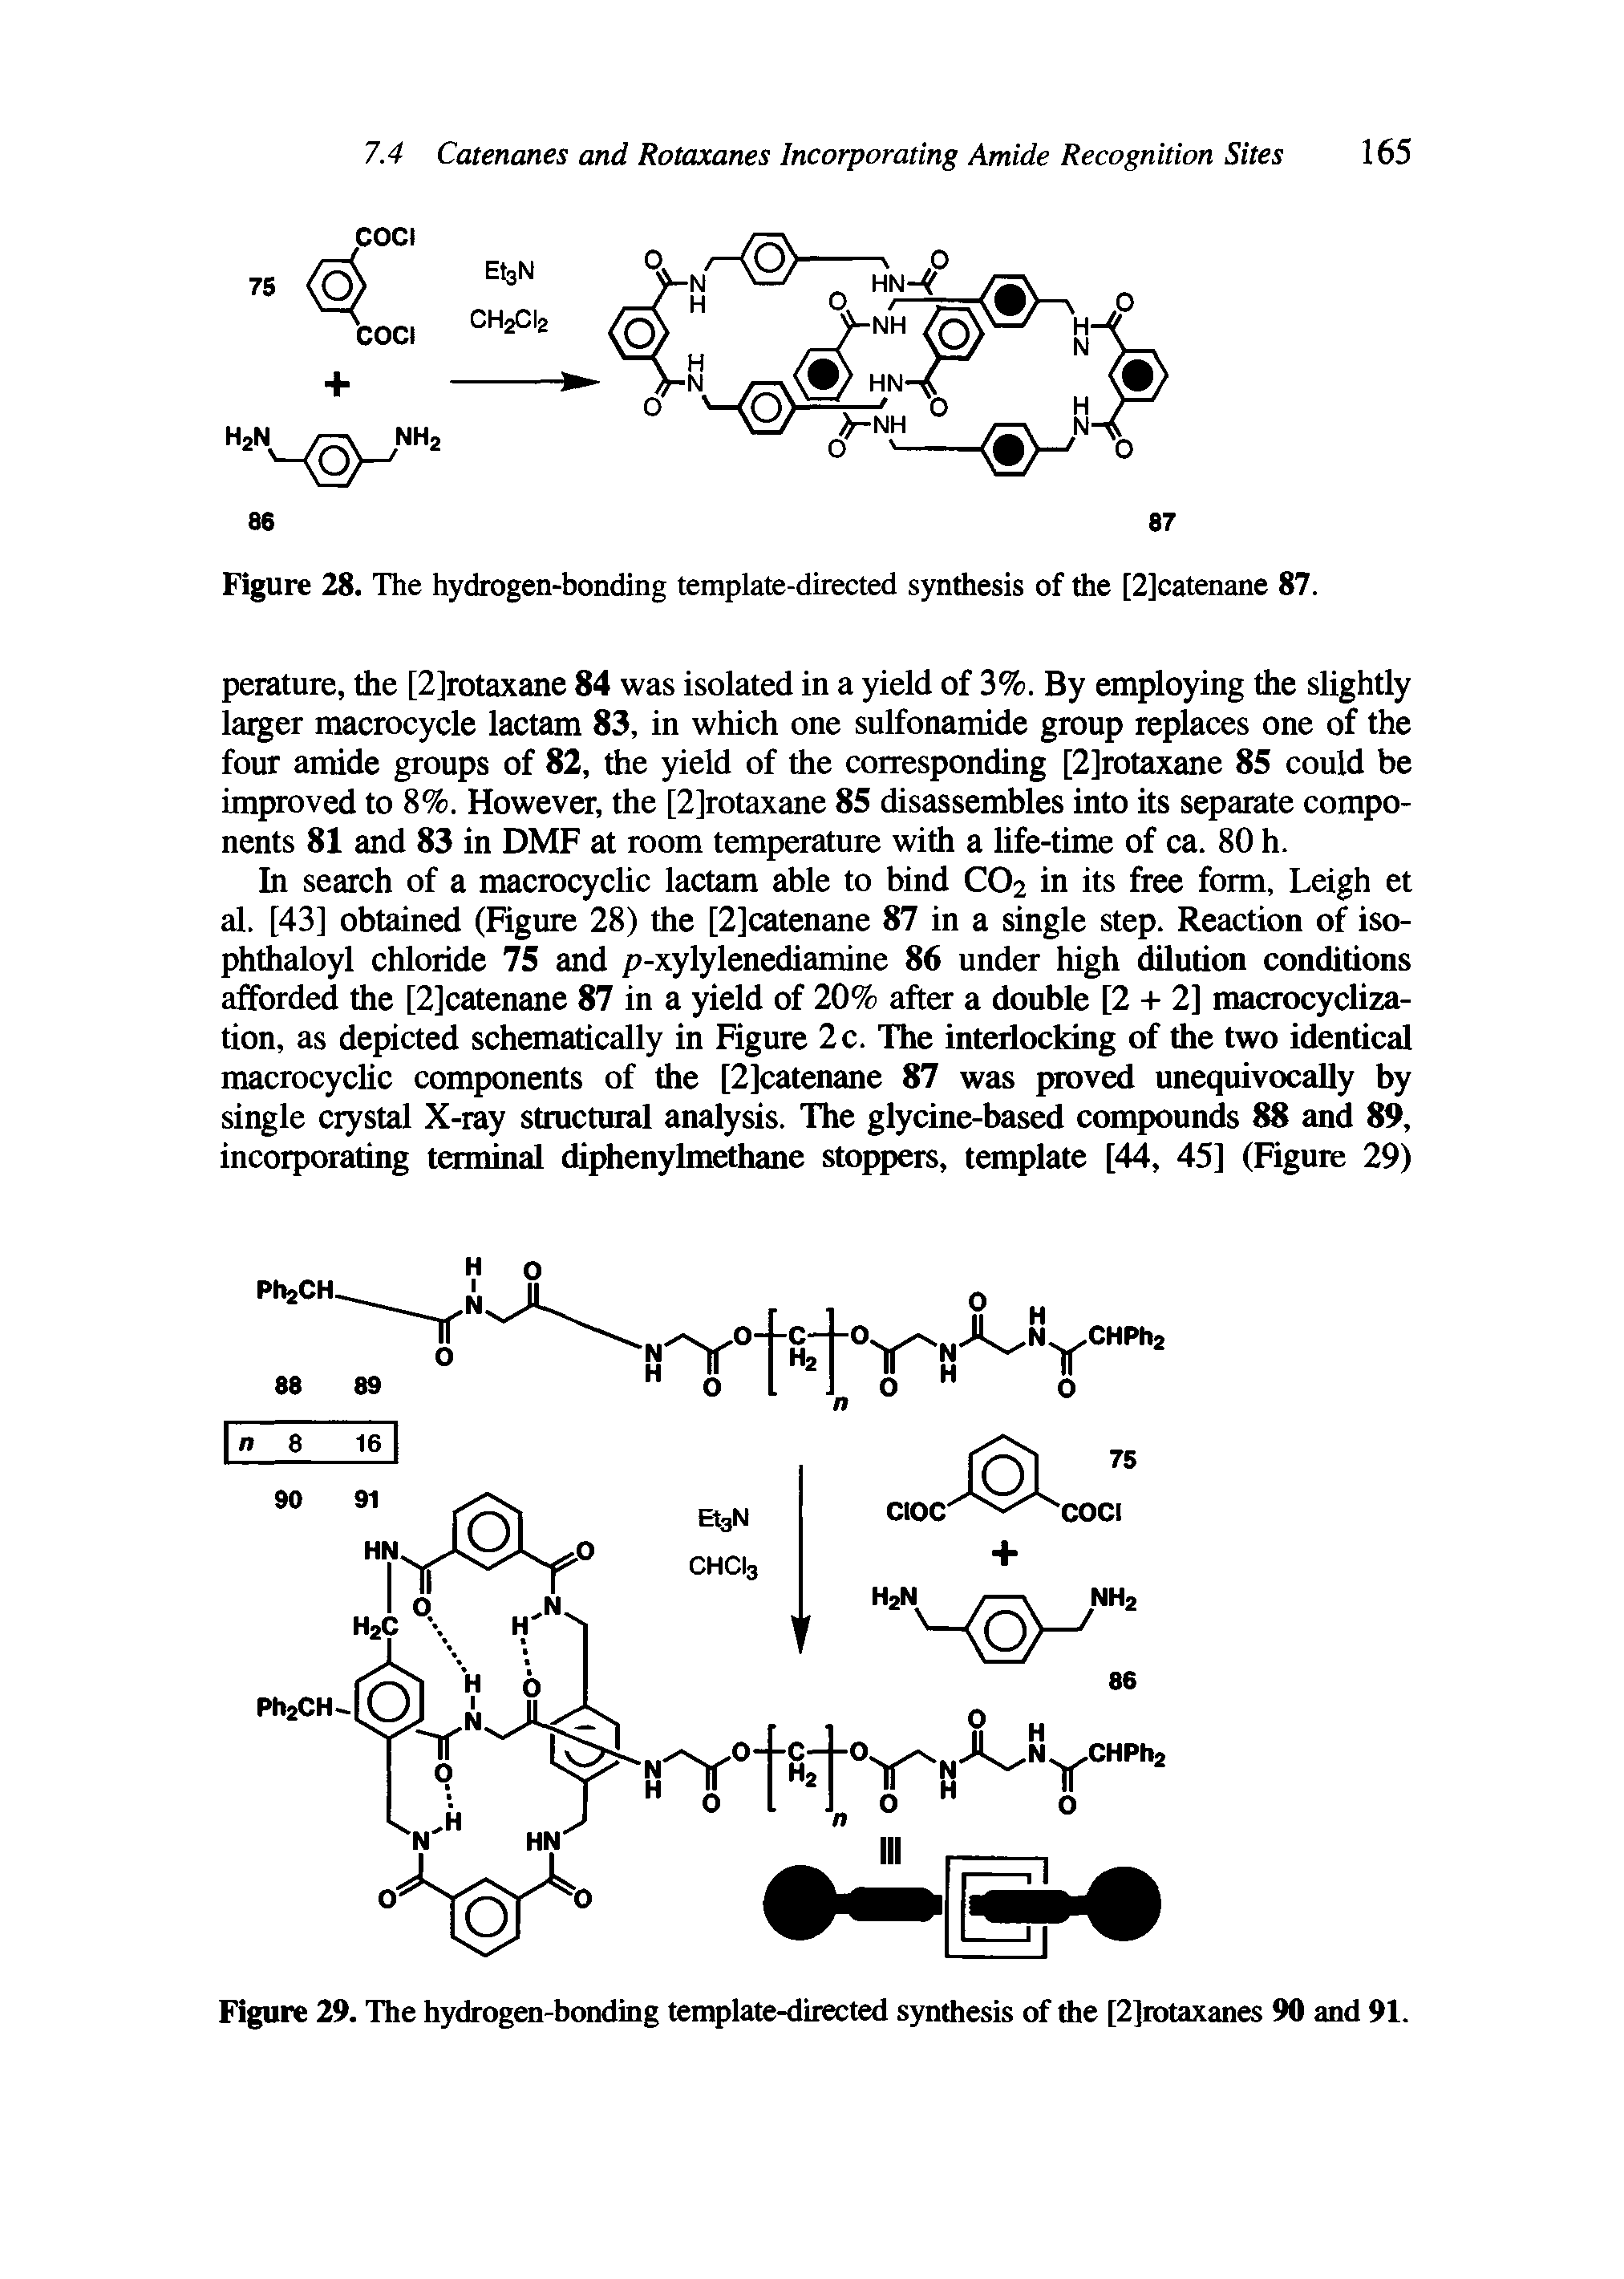 Figure 28. The hydrogen-bonding template-directed synthesis of the [2]catenane 87.